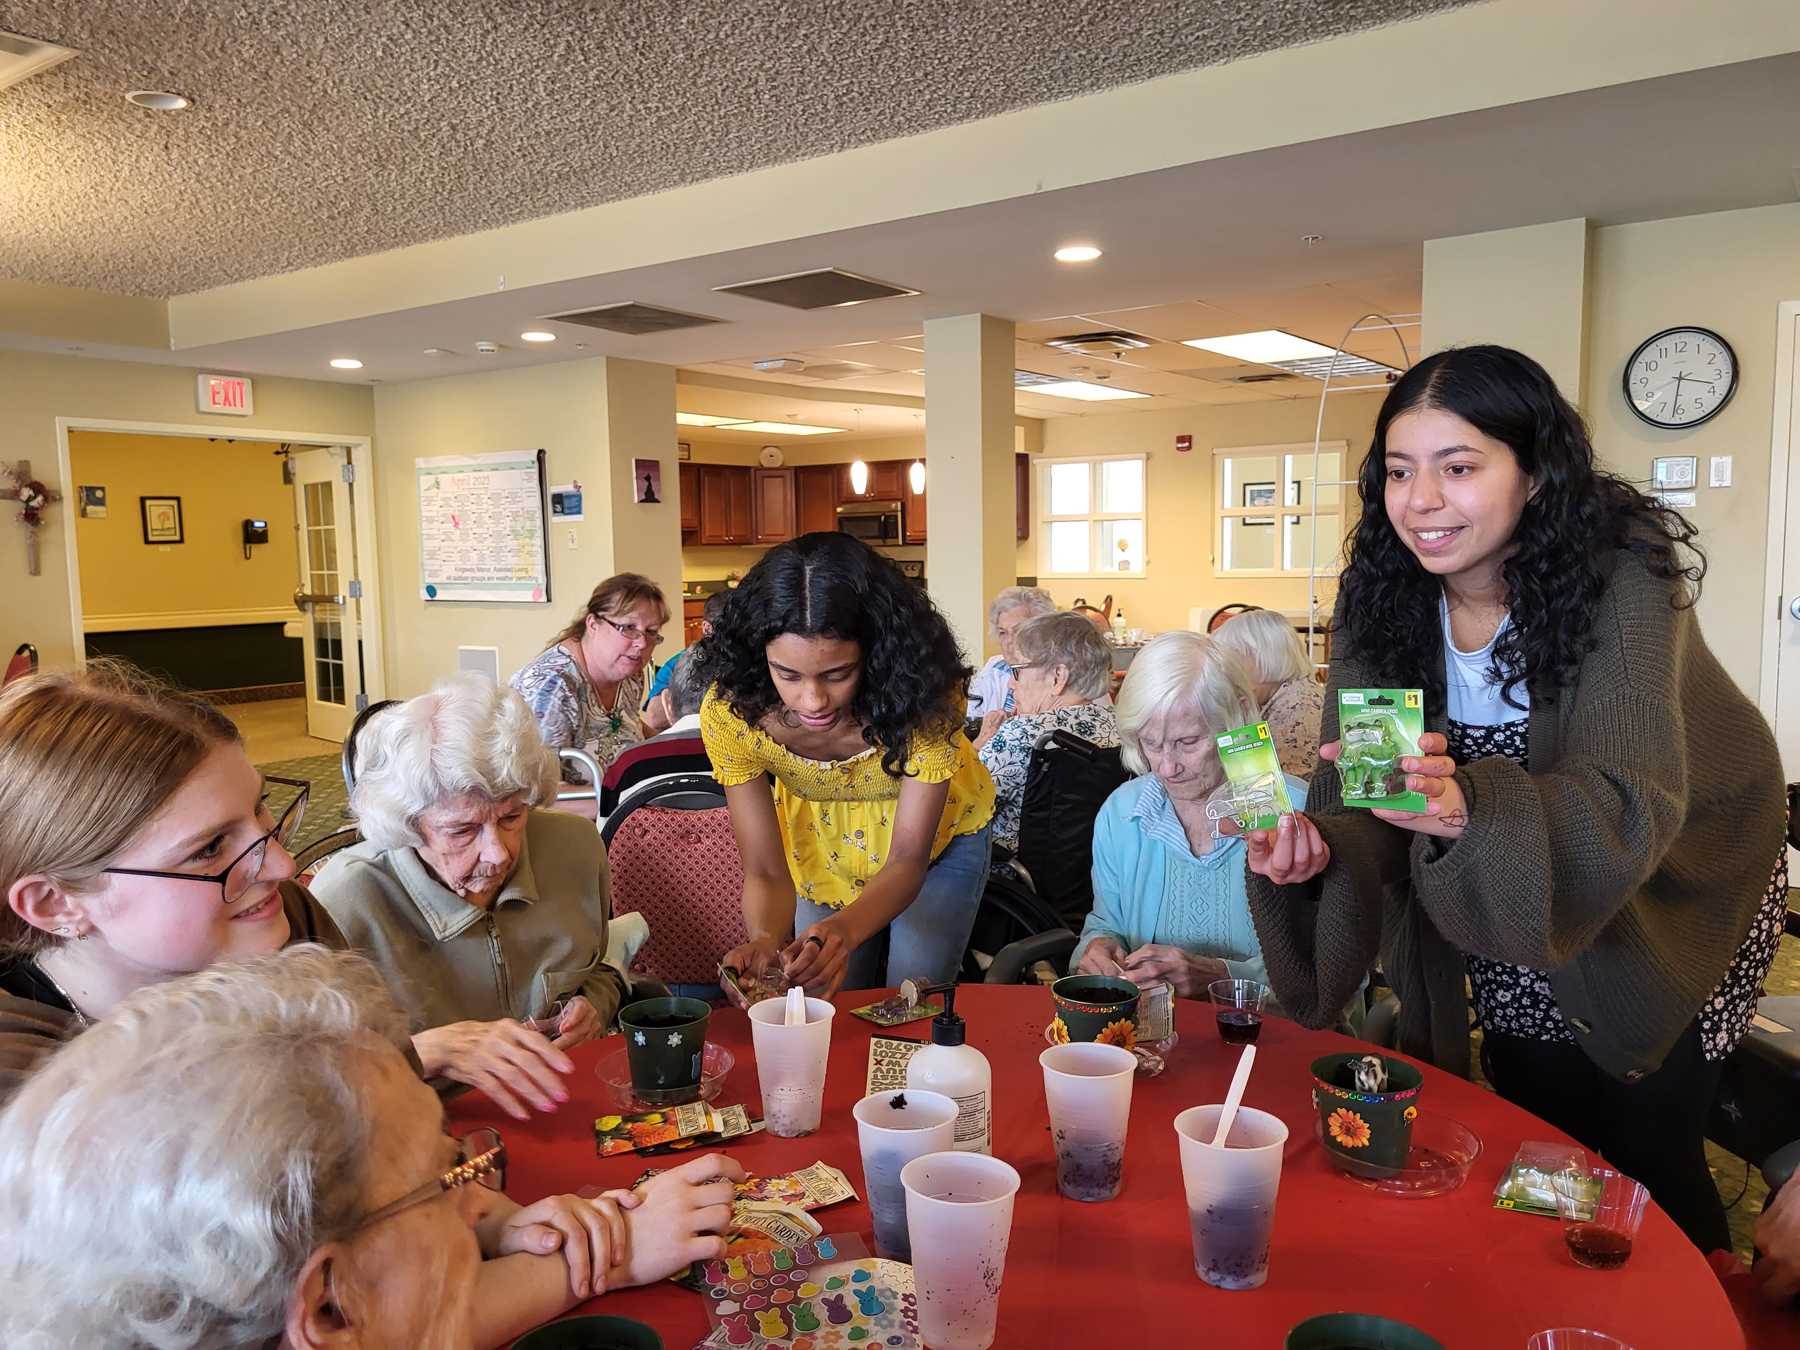 Students planting seeds in flowers pots with residents